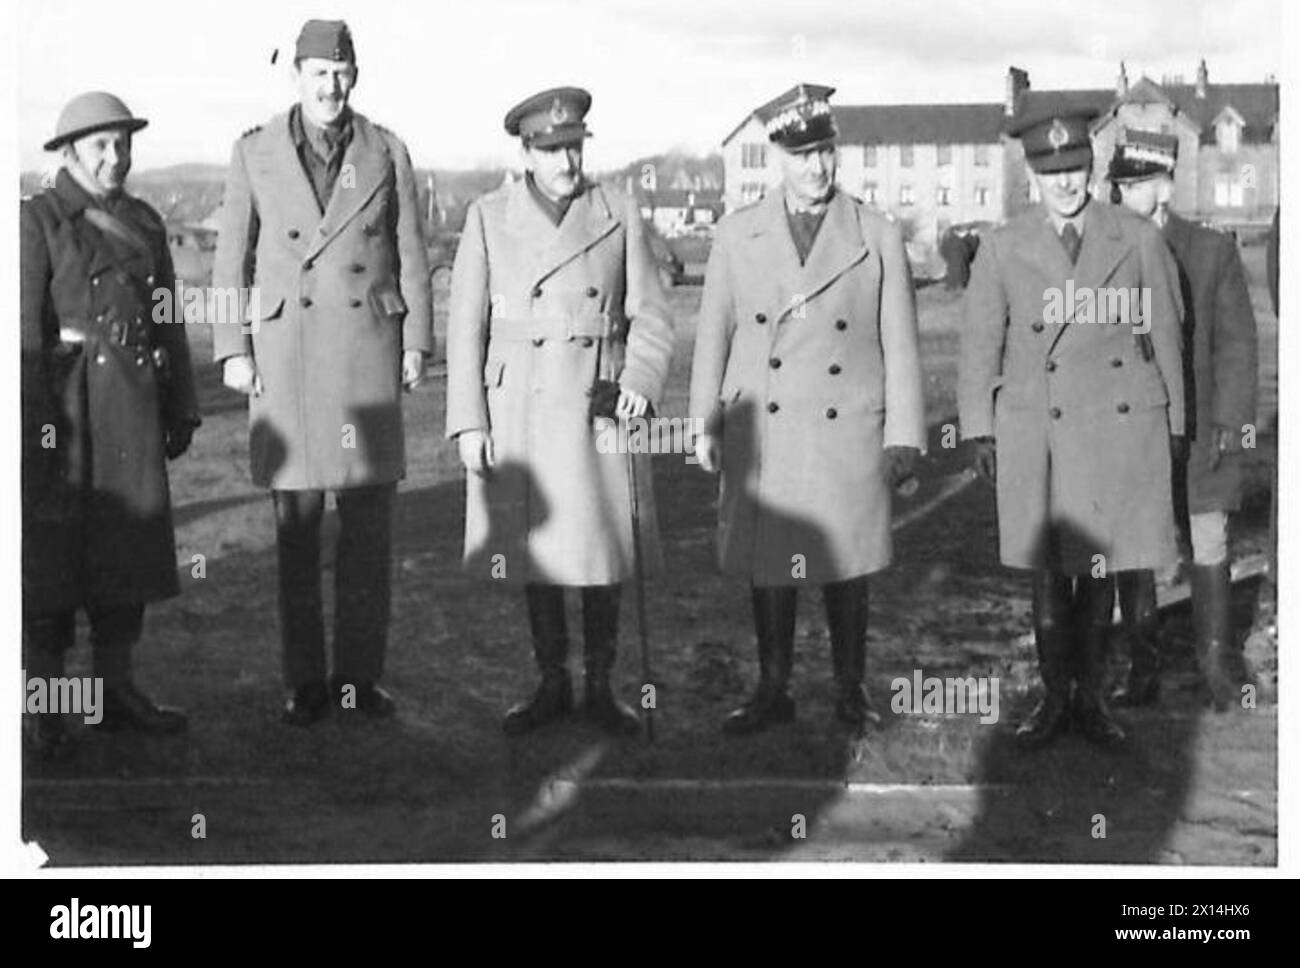 THE POLISH ARMY IN BRITAIN, 1940-1947 - General Alan Brooke, the C-in-C of the Home Forces; General Władysław Sikorski, the C-in-C of the Polish Armed Forces, and General Harold Carrington, the Commander of the Scottish Command, during General Brooke's visit to units of the 1st Polish Corps in Dundee area. General Kukiel, the Commander of the 1st Corps, is first from the right (slightly obscured).This particular photograph was probably taken at Broughty Ferry where the 5th Cadre Rifle Brigade was stationed, 11 December 1940 British Army, Scottish Command, Polish Army, Polish Armed Forces in th Stock Photo